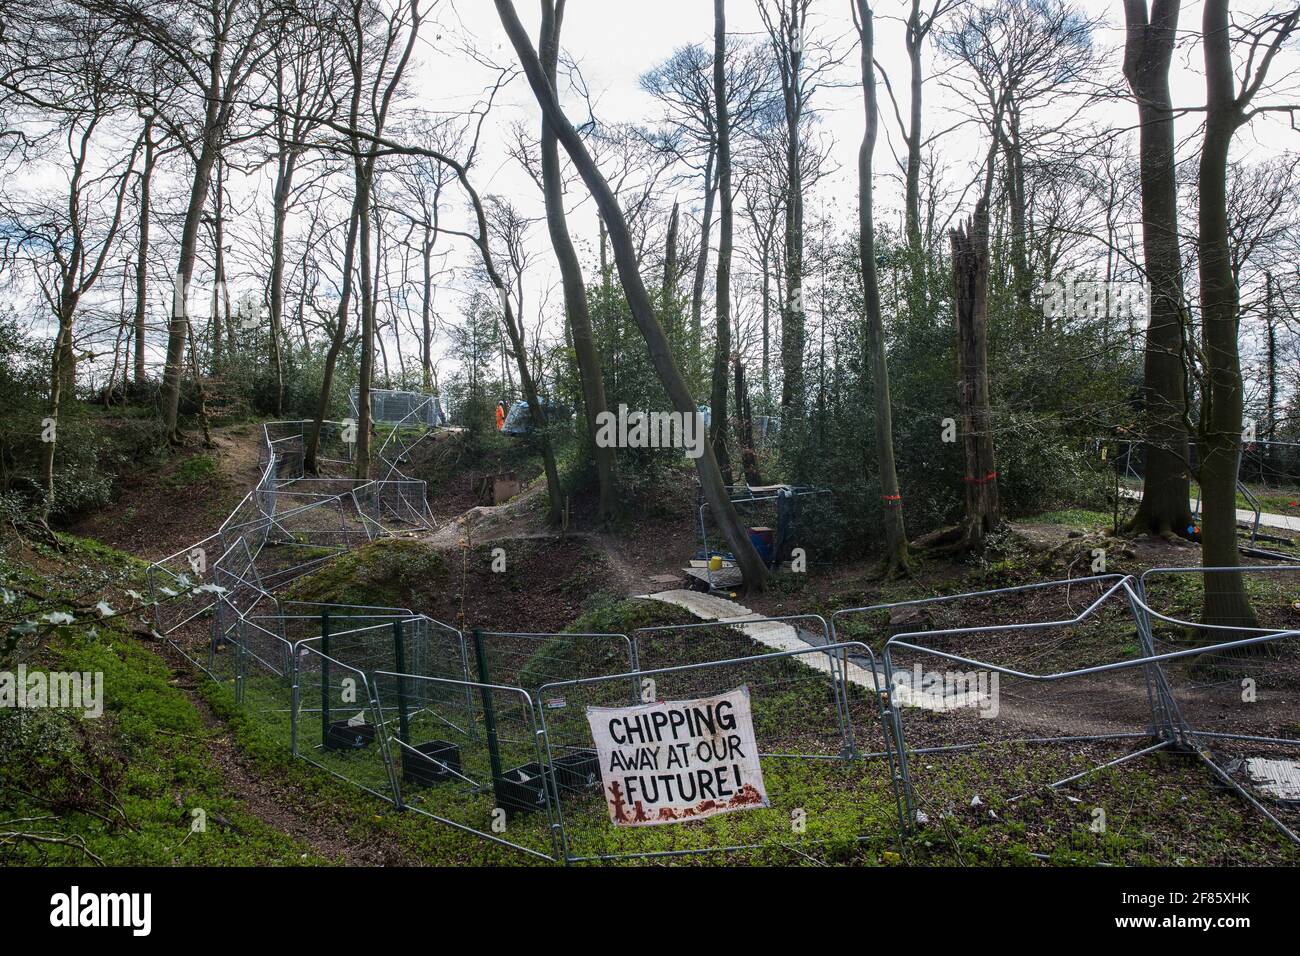 Wendover, UK. 9th April, 2021. Fencing is used to divide two areas of Jones Hill Wood, ancient woodland said to have inspired Roald Dahl, during tree felling operations for the HS2 high-speed rail link. Tree felling work began this week, in spite of the presence of resting places and/or breeding sites for pipistrelle, barbastelle, noctule, brown long-eared and natterer's bats, following the issuing of a bat licence to HS2's contractors by Natural England on 30th March. Credit: Mark Kerrison/Alamy Live News Stock Photo